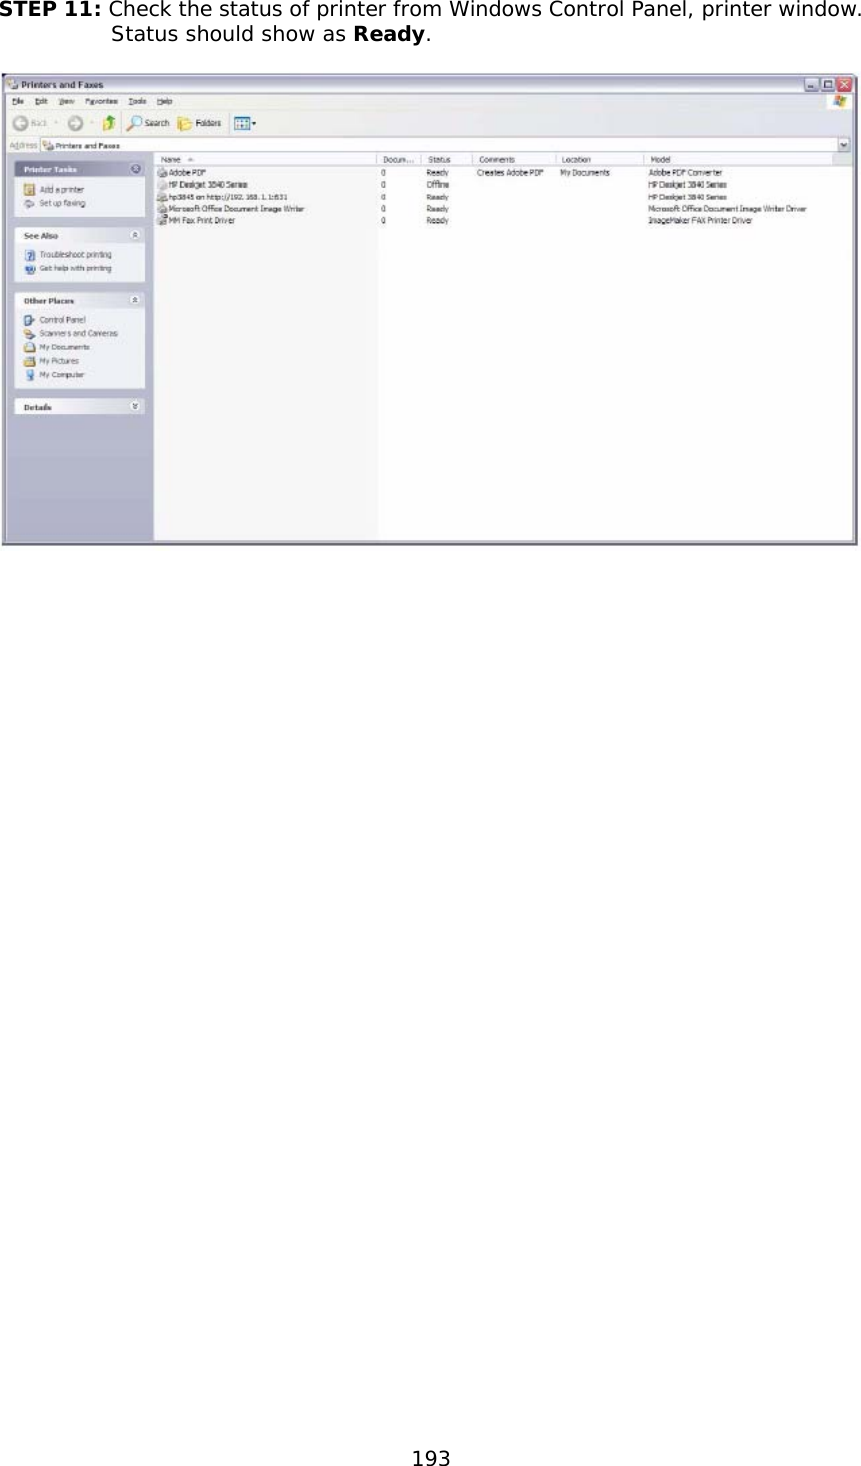  193  STEP 11: Check the status of printer from Windows Control Panel, printer window.   Status should show as Ready.         